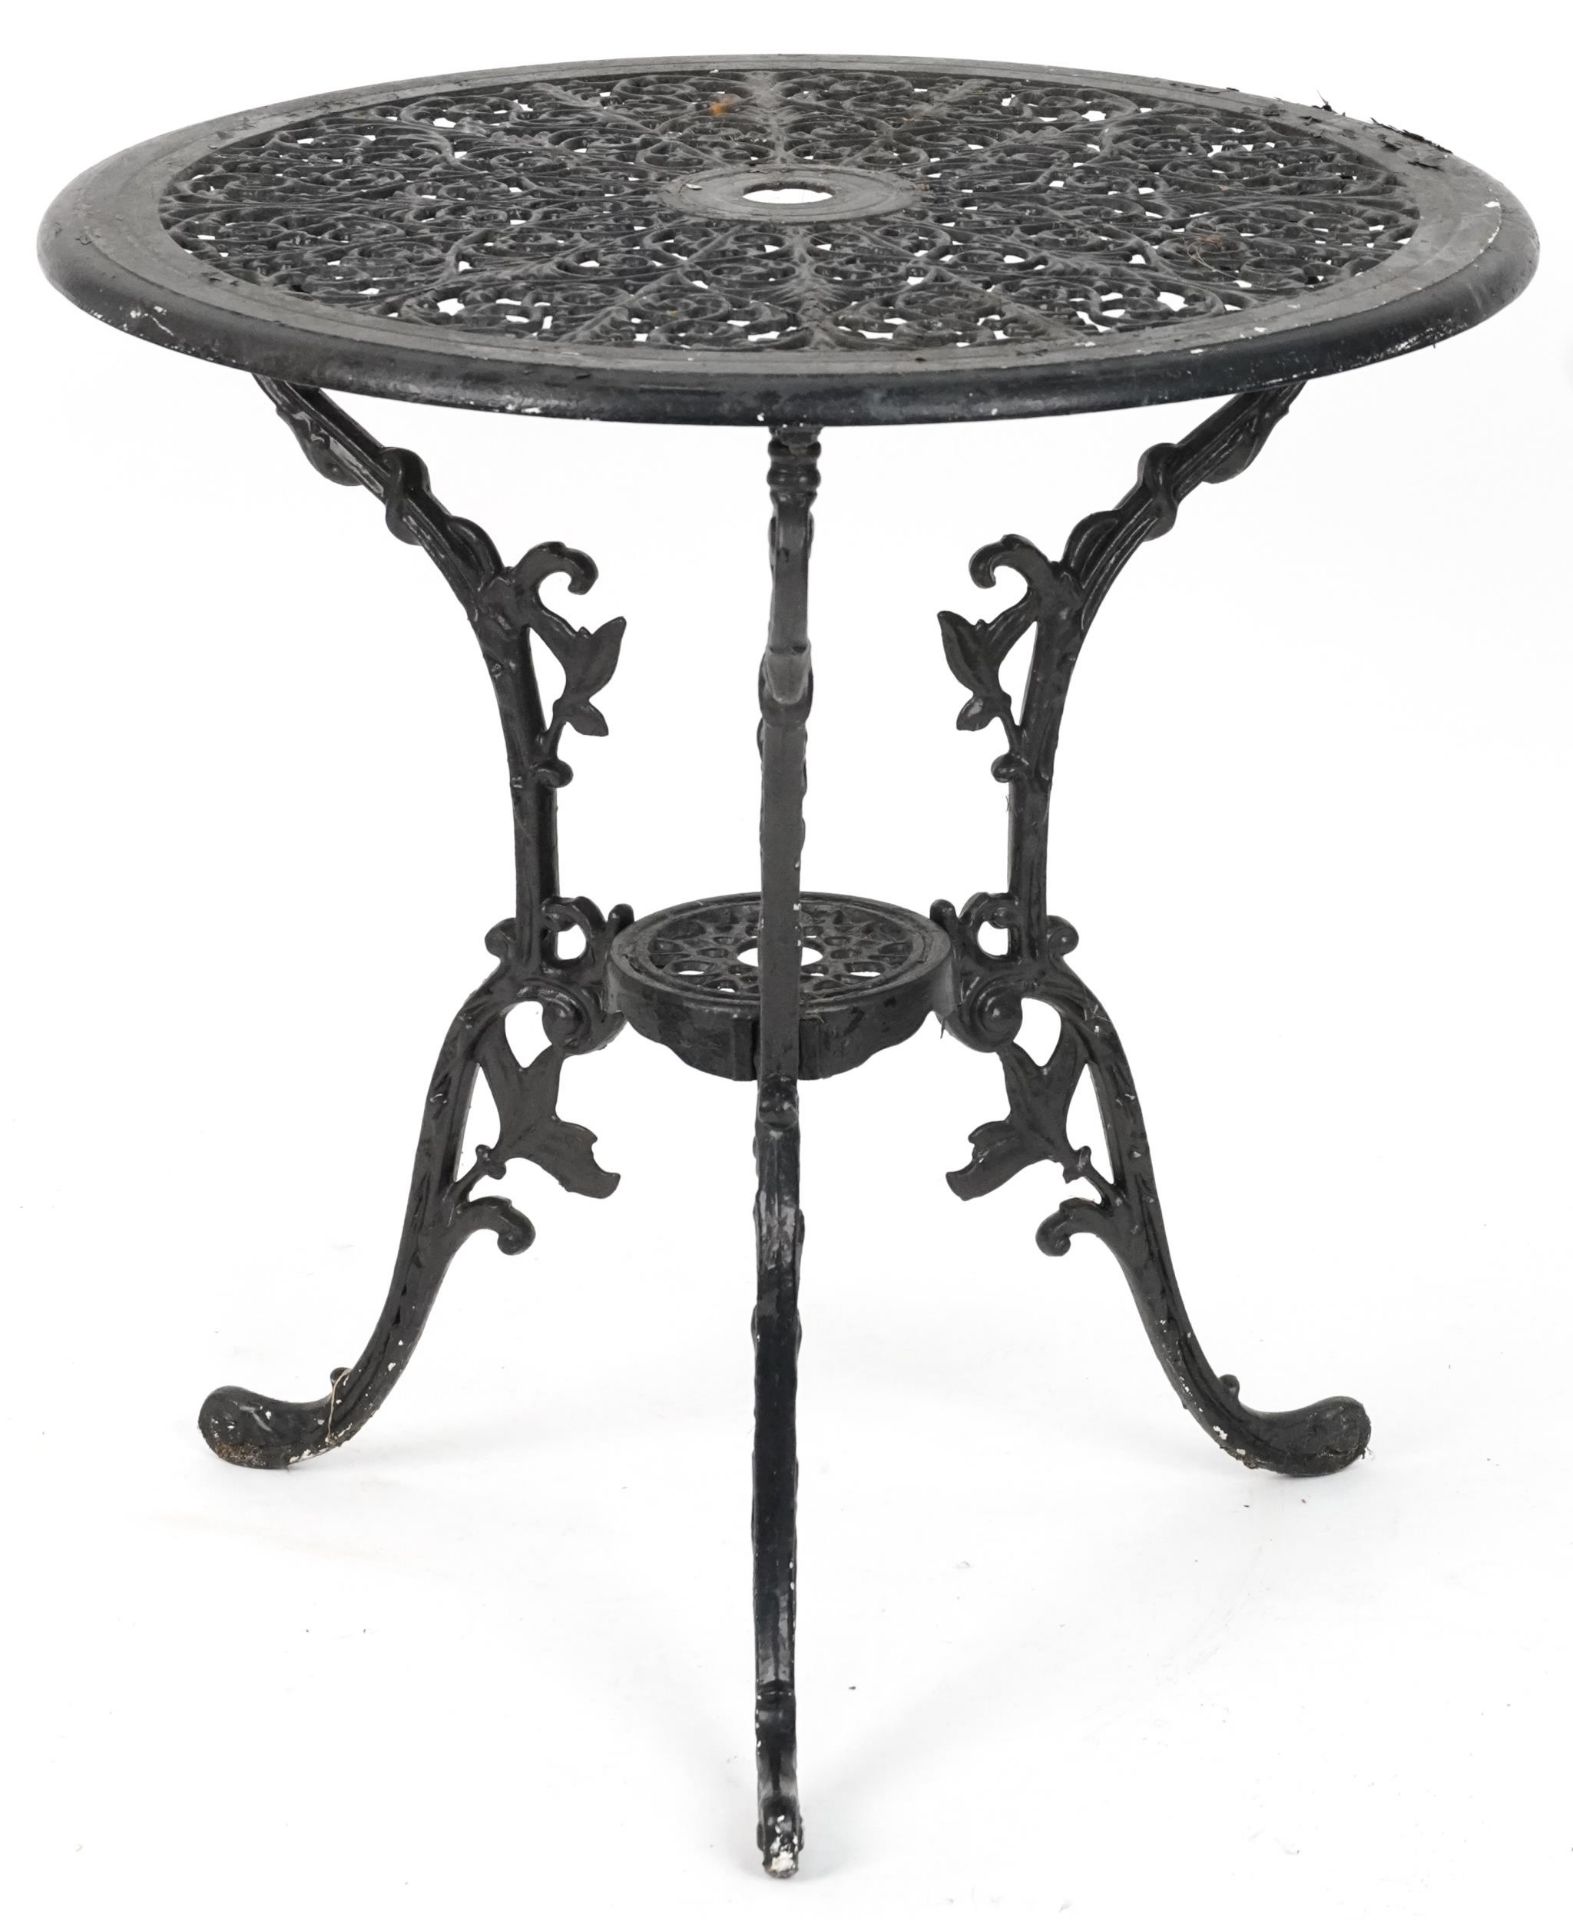 Black painted cast metal circular garden table with three chairs, 70.5cm high x 69cm in diameter : - Image 7 of 7